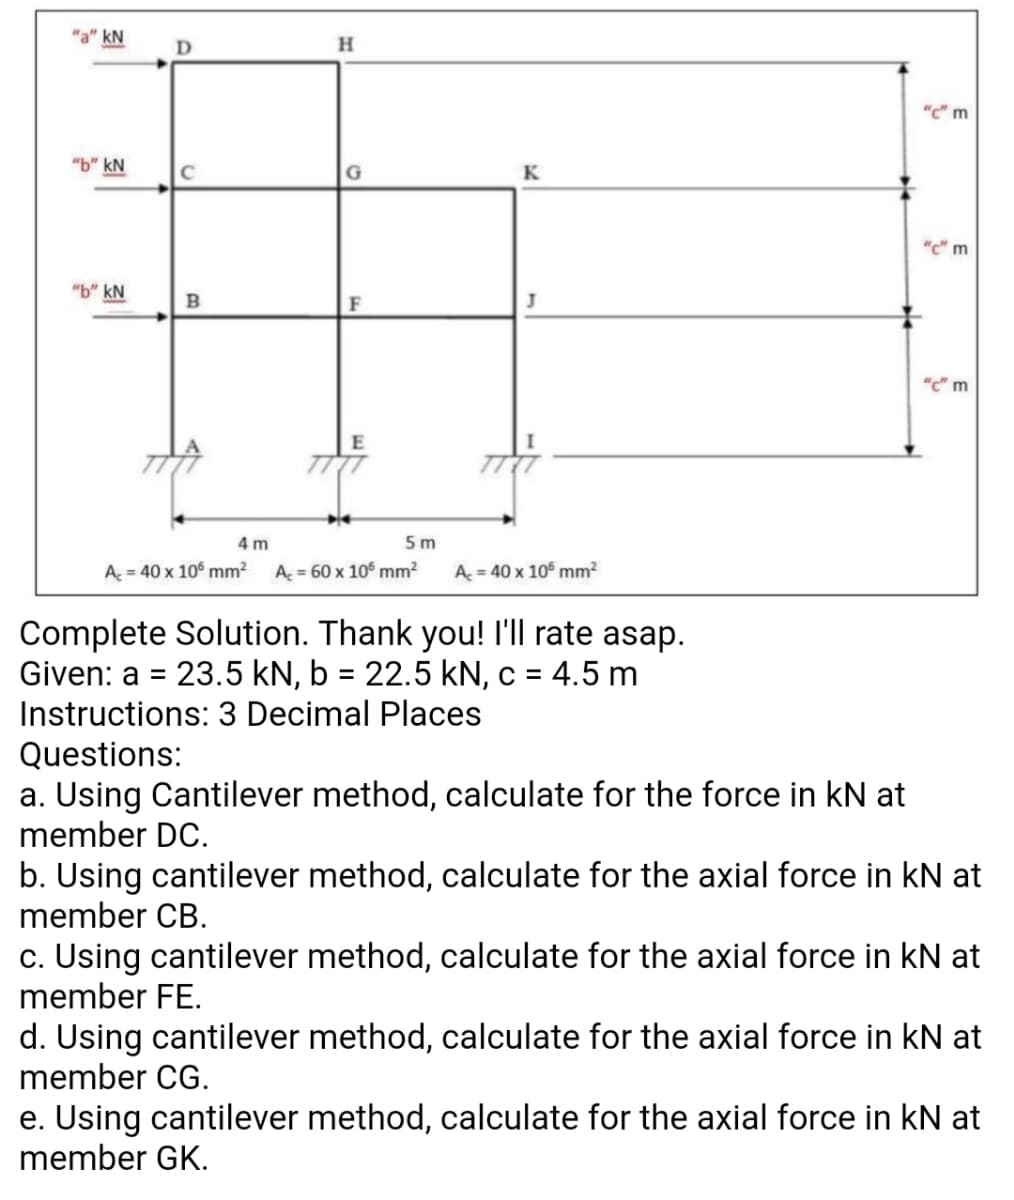 kN
"c" m
"b" kN
C
K
"c" m
"b" kN
B
"C" m
4 m
5m
A = 40 x 10° mm²
A = 60 x 10° mm²
A = 40 x 10° mm?
Complete Solution. Thank you! 'll rate asap.
Given: a = 23.5 kN, b = 22.5 kN, c = 4.5 m
Instructions: 3 Decimal Places
%3D
%3D
%3D
Questions:
a. Using Cantilever method, calculate for the force in kN at
member DC.
b. Using cantilever method, cal
member CB.
late for the axial force in kN at
c. Using cantilever method, calculate for the axial force in kN at
member FE.
d. Using cantilever method, calculate for the axial force in kN at
member CG.
e. Using cantilever method, calculate for the axial force in kN at
member GK.
